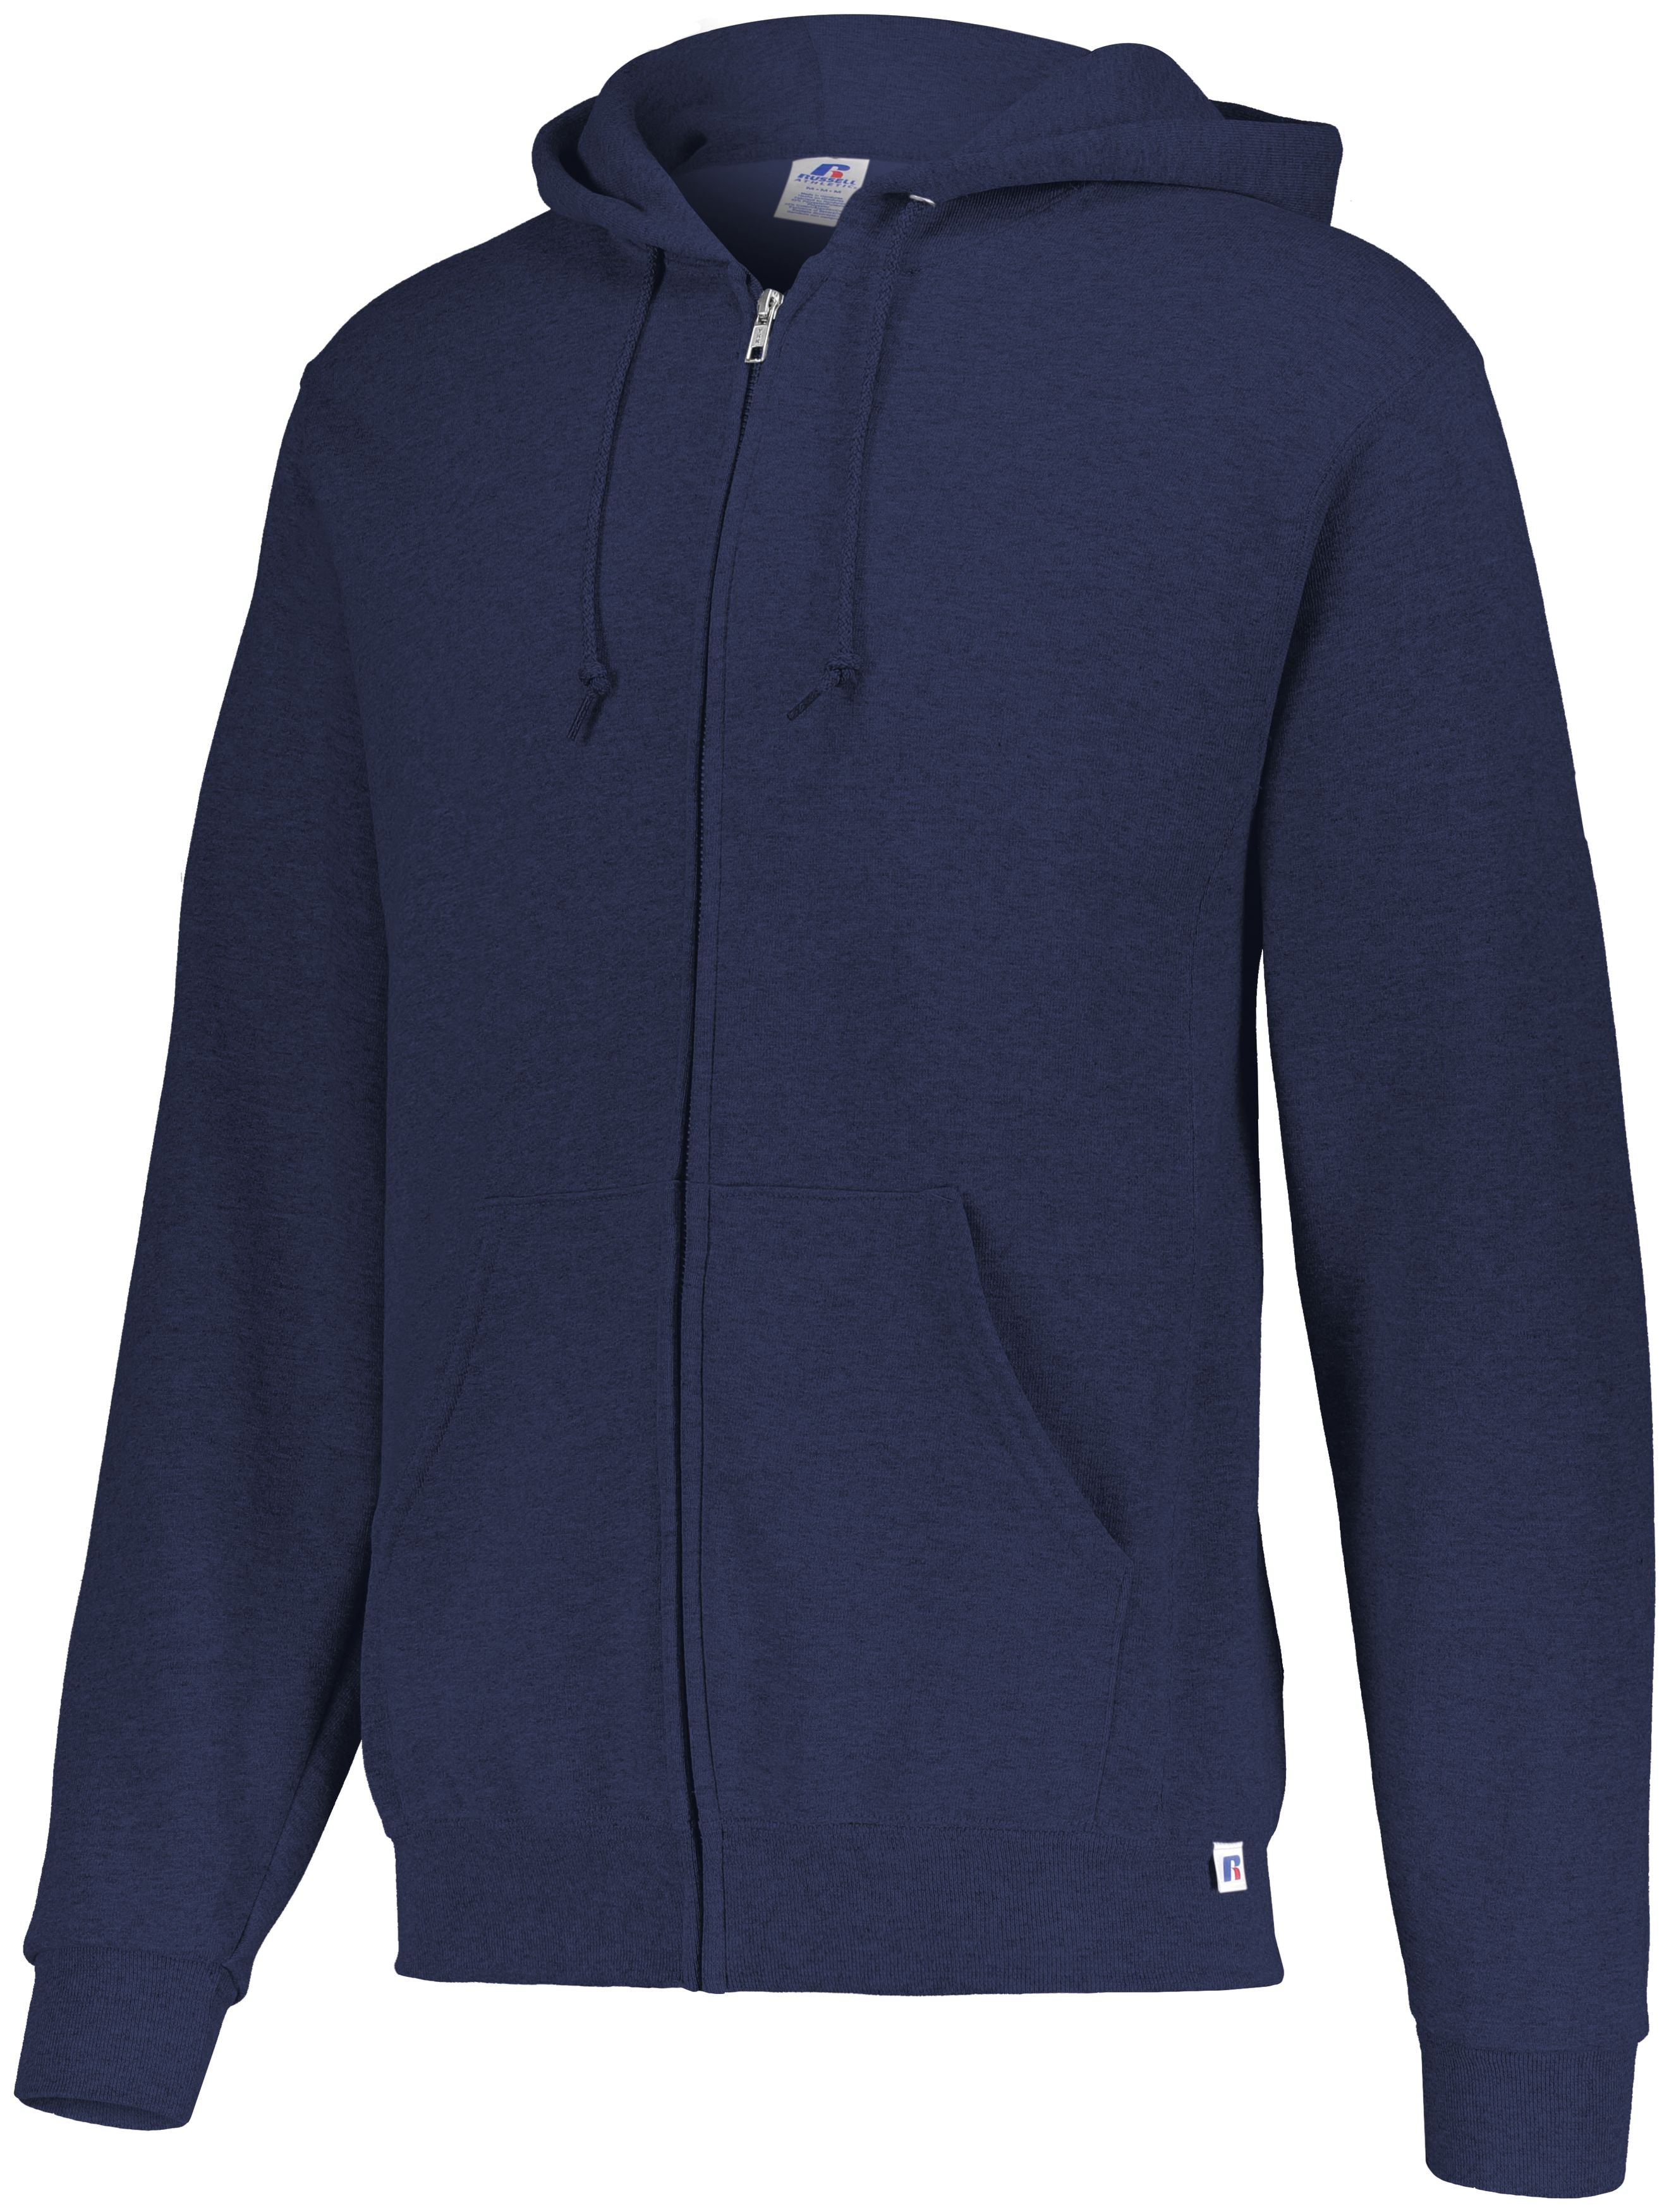 Russell Athletic Dri-Power Fleece Full-Zip Hoodie in J.Navy  -Part of the Adult, Russell-Athletic-Products, Shirts product lines at KanaleyCreations.com